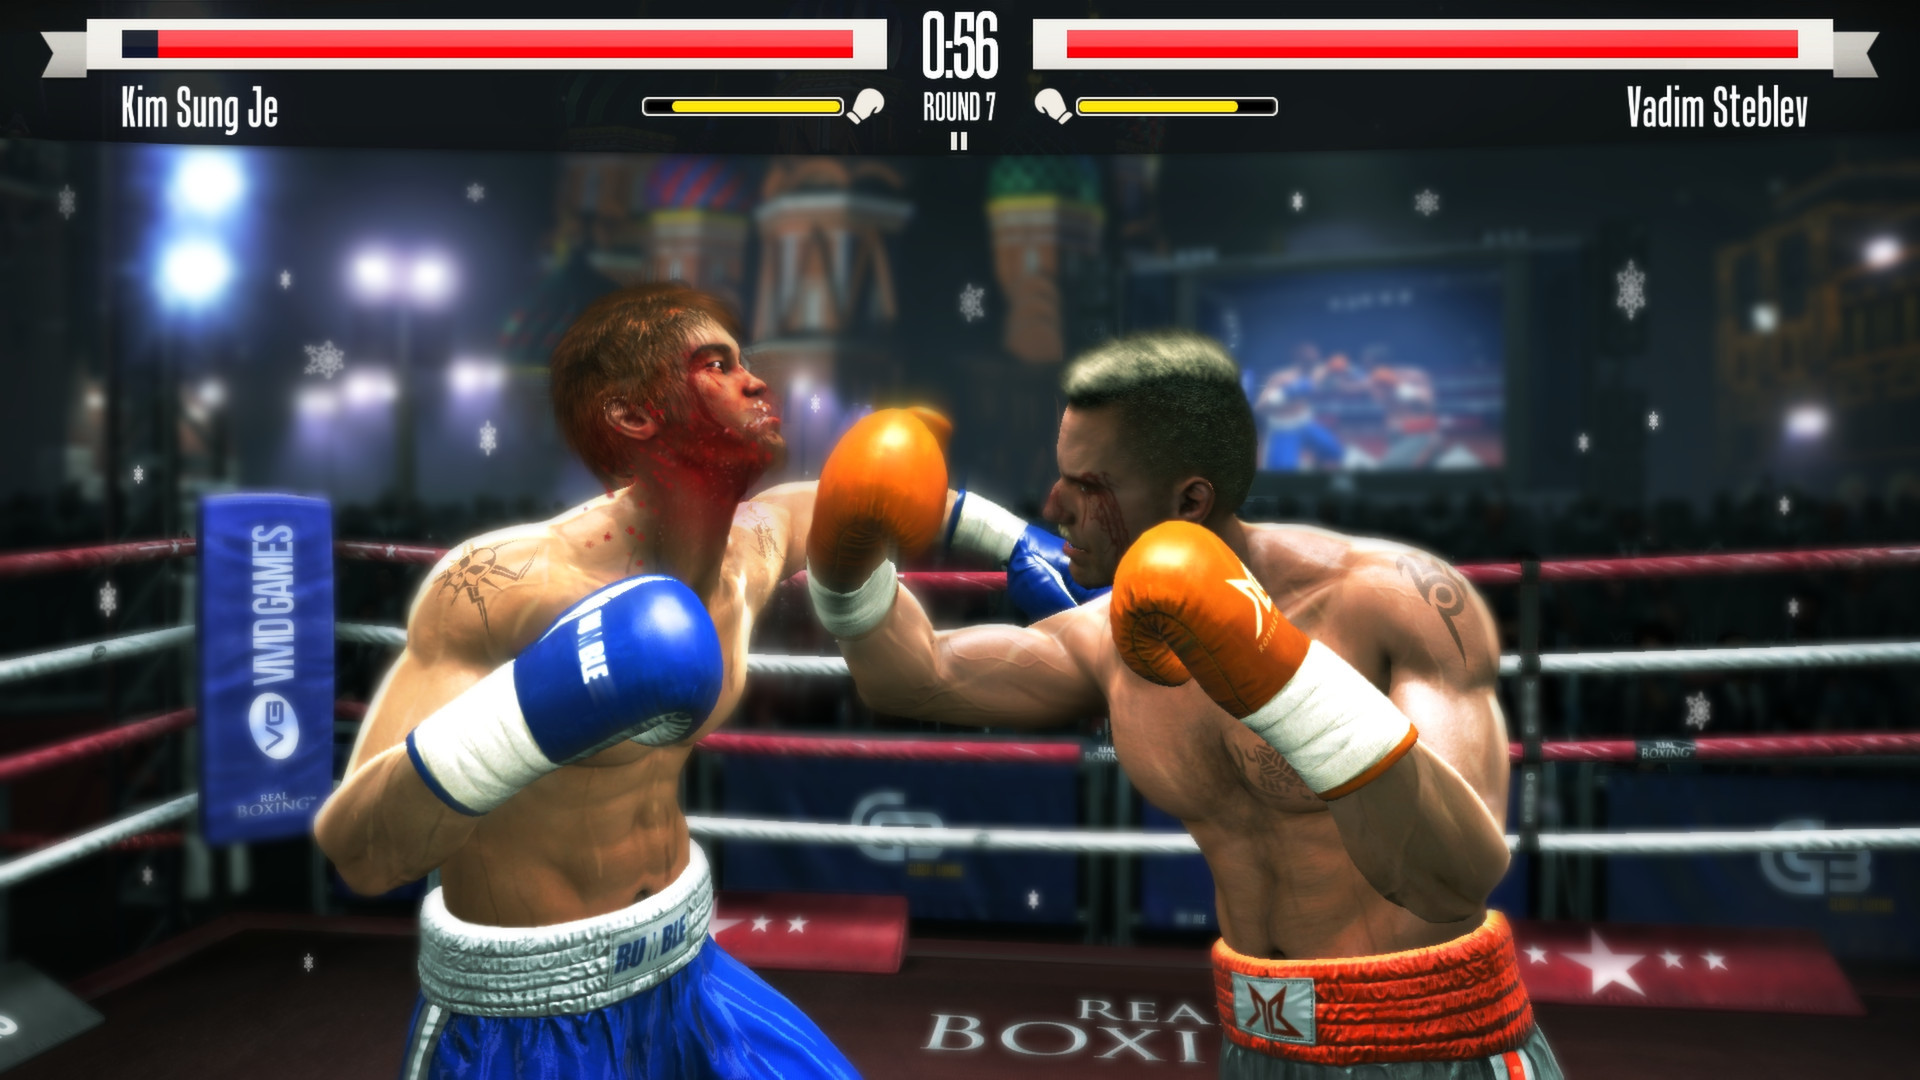 Real Boxing™ on Steam